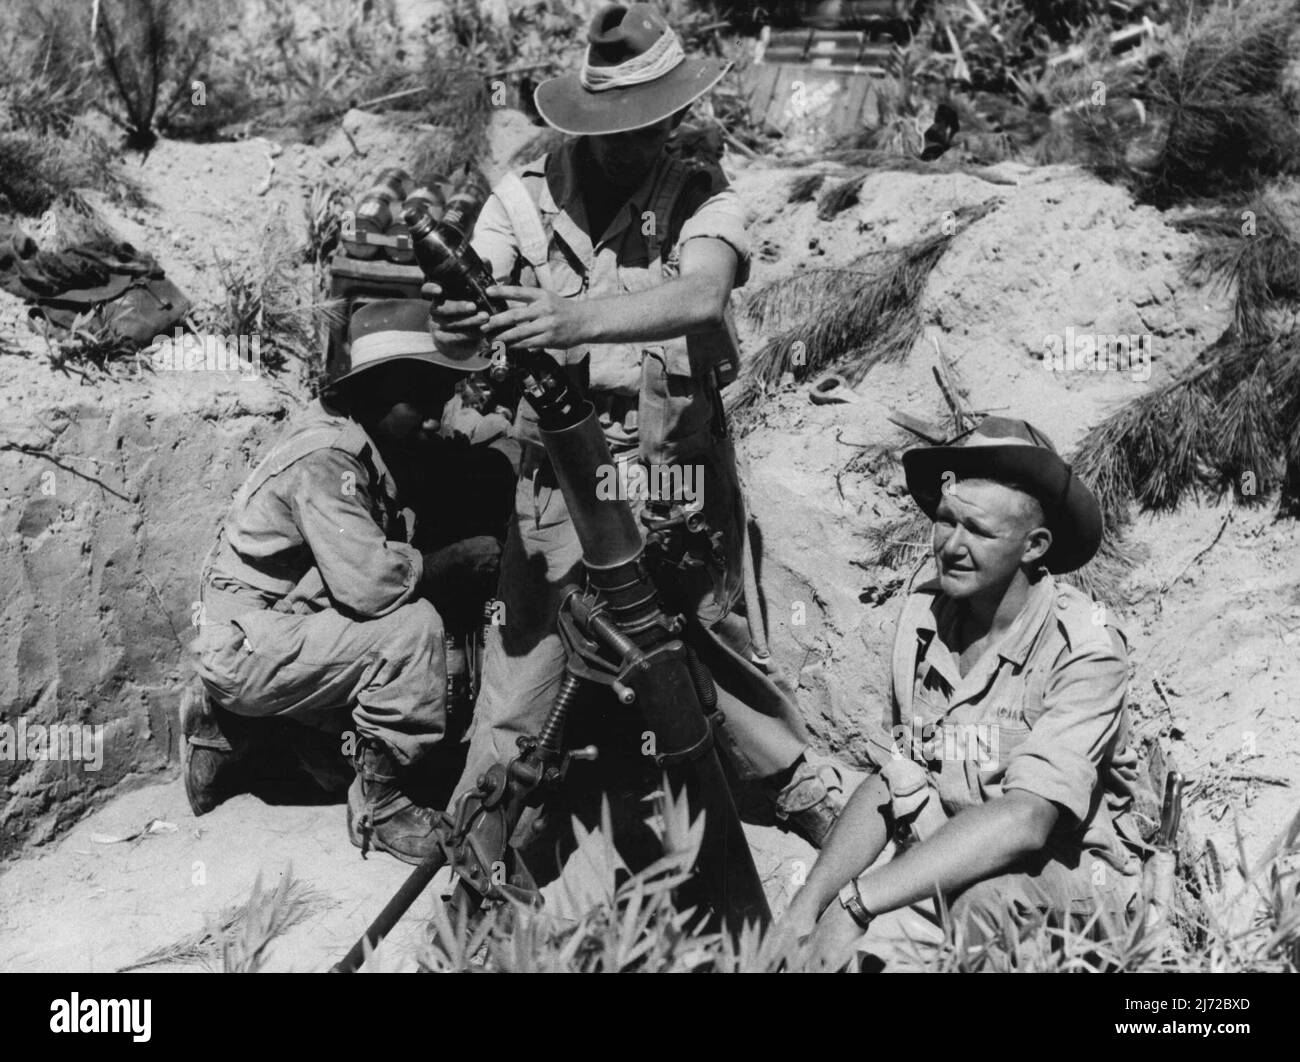 A Mortar Gun crew go into action during training at Haramura Japan, L to R: Pte Houston E.F. of Queenstreet Mt Morgan Queensland; Pte D.R. of Dairy Road Ingelburn N.S.W. and Pte Holford J.E. of 14 Andrews Street Windsor Victoria. The British Commonwealth Occupation Force in Japan is being raised to war time strength and 3 Bn Royal Australian Regiment has been training intensively for the type of terrain which will have to be covered in Korea. September 13, 1950. (Photo by Public Relations Section, HQ BCOF Japan). Stock Photo